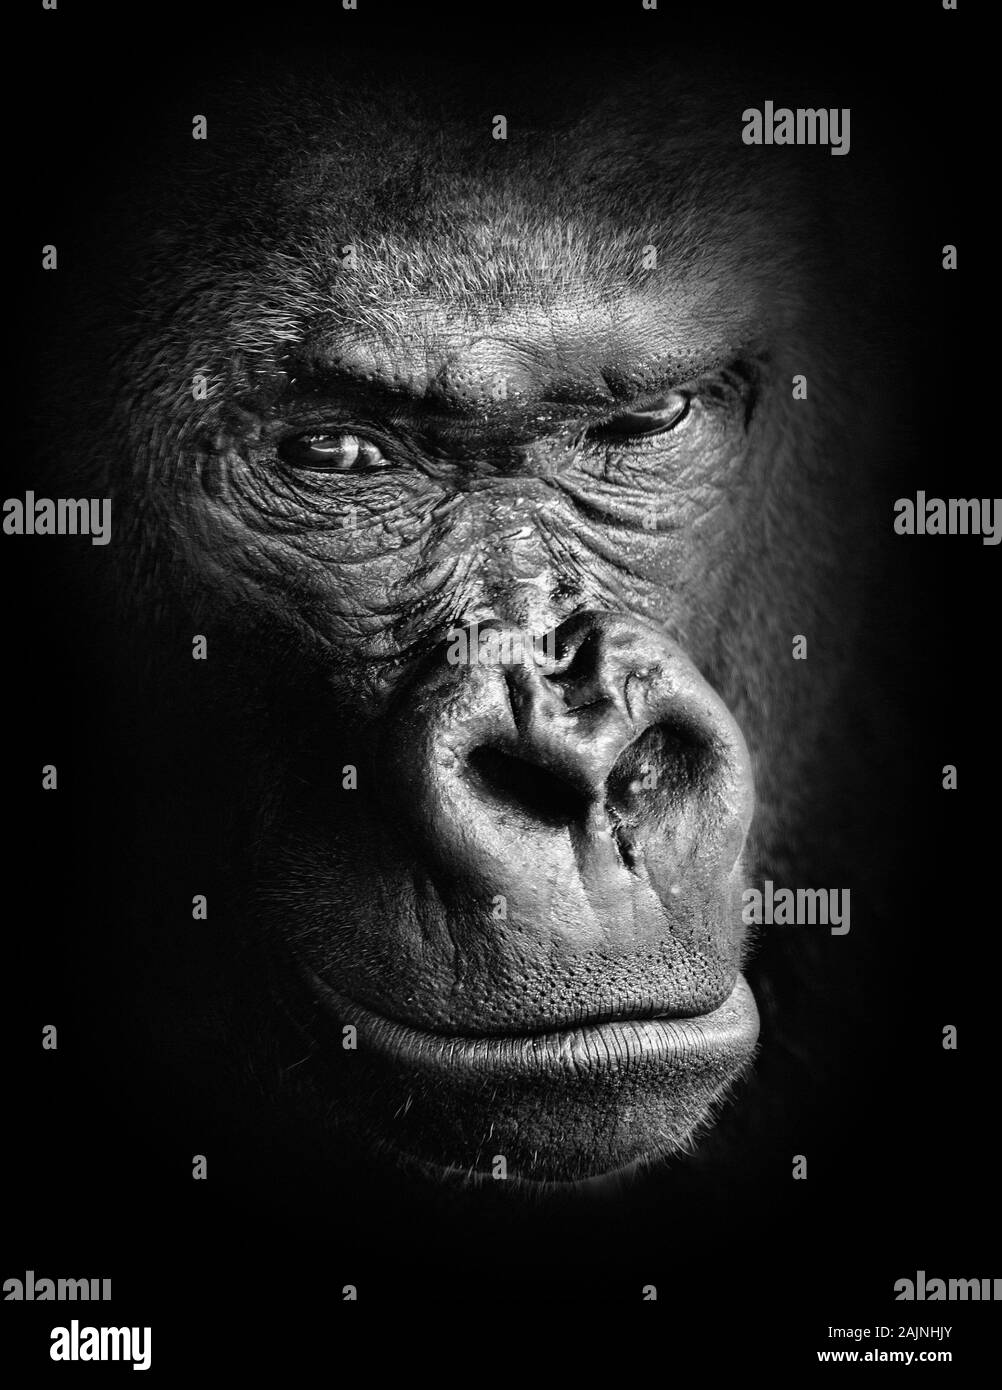 Black and white high contrast animal portrait of a pensive gorilla face isolated in shadows Stock Photo